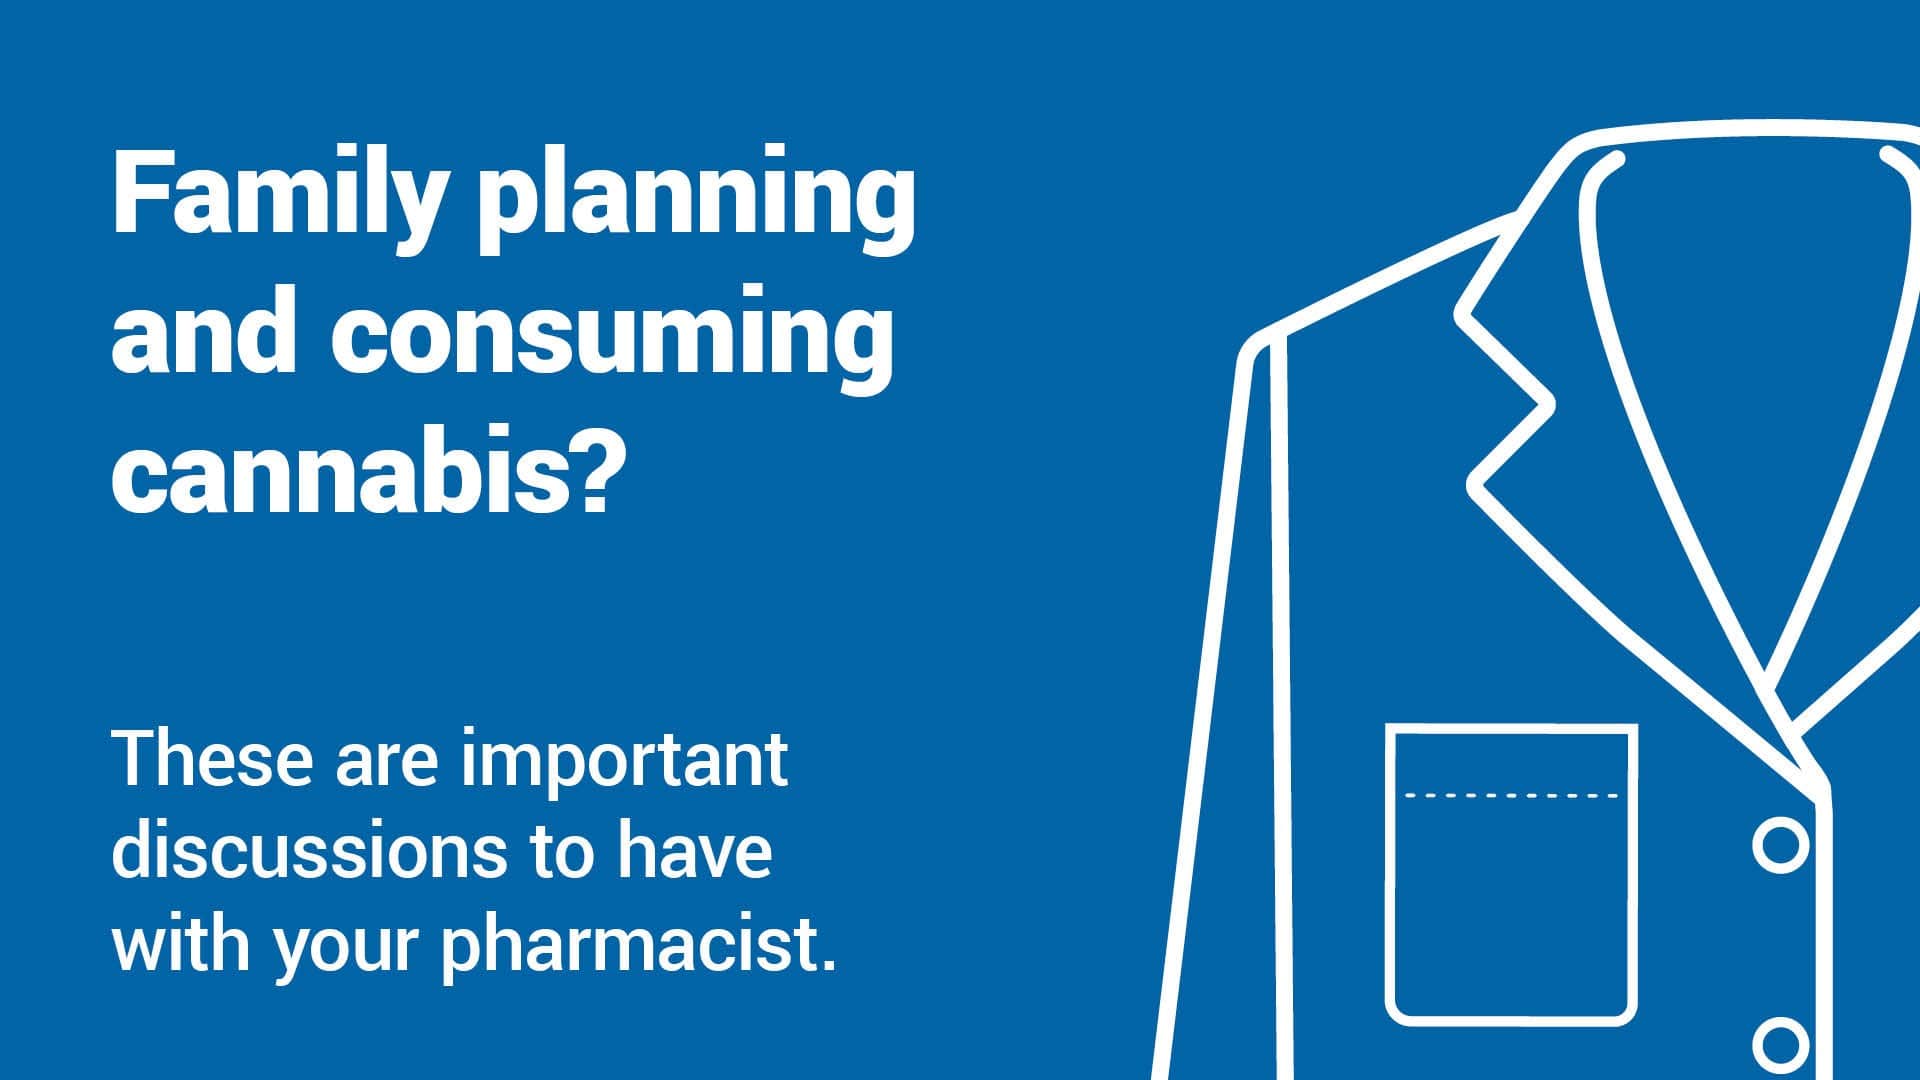 Family planning and consuming cannabis